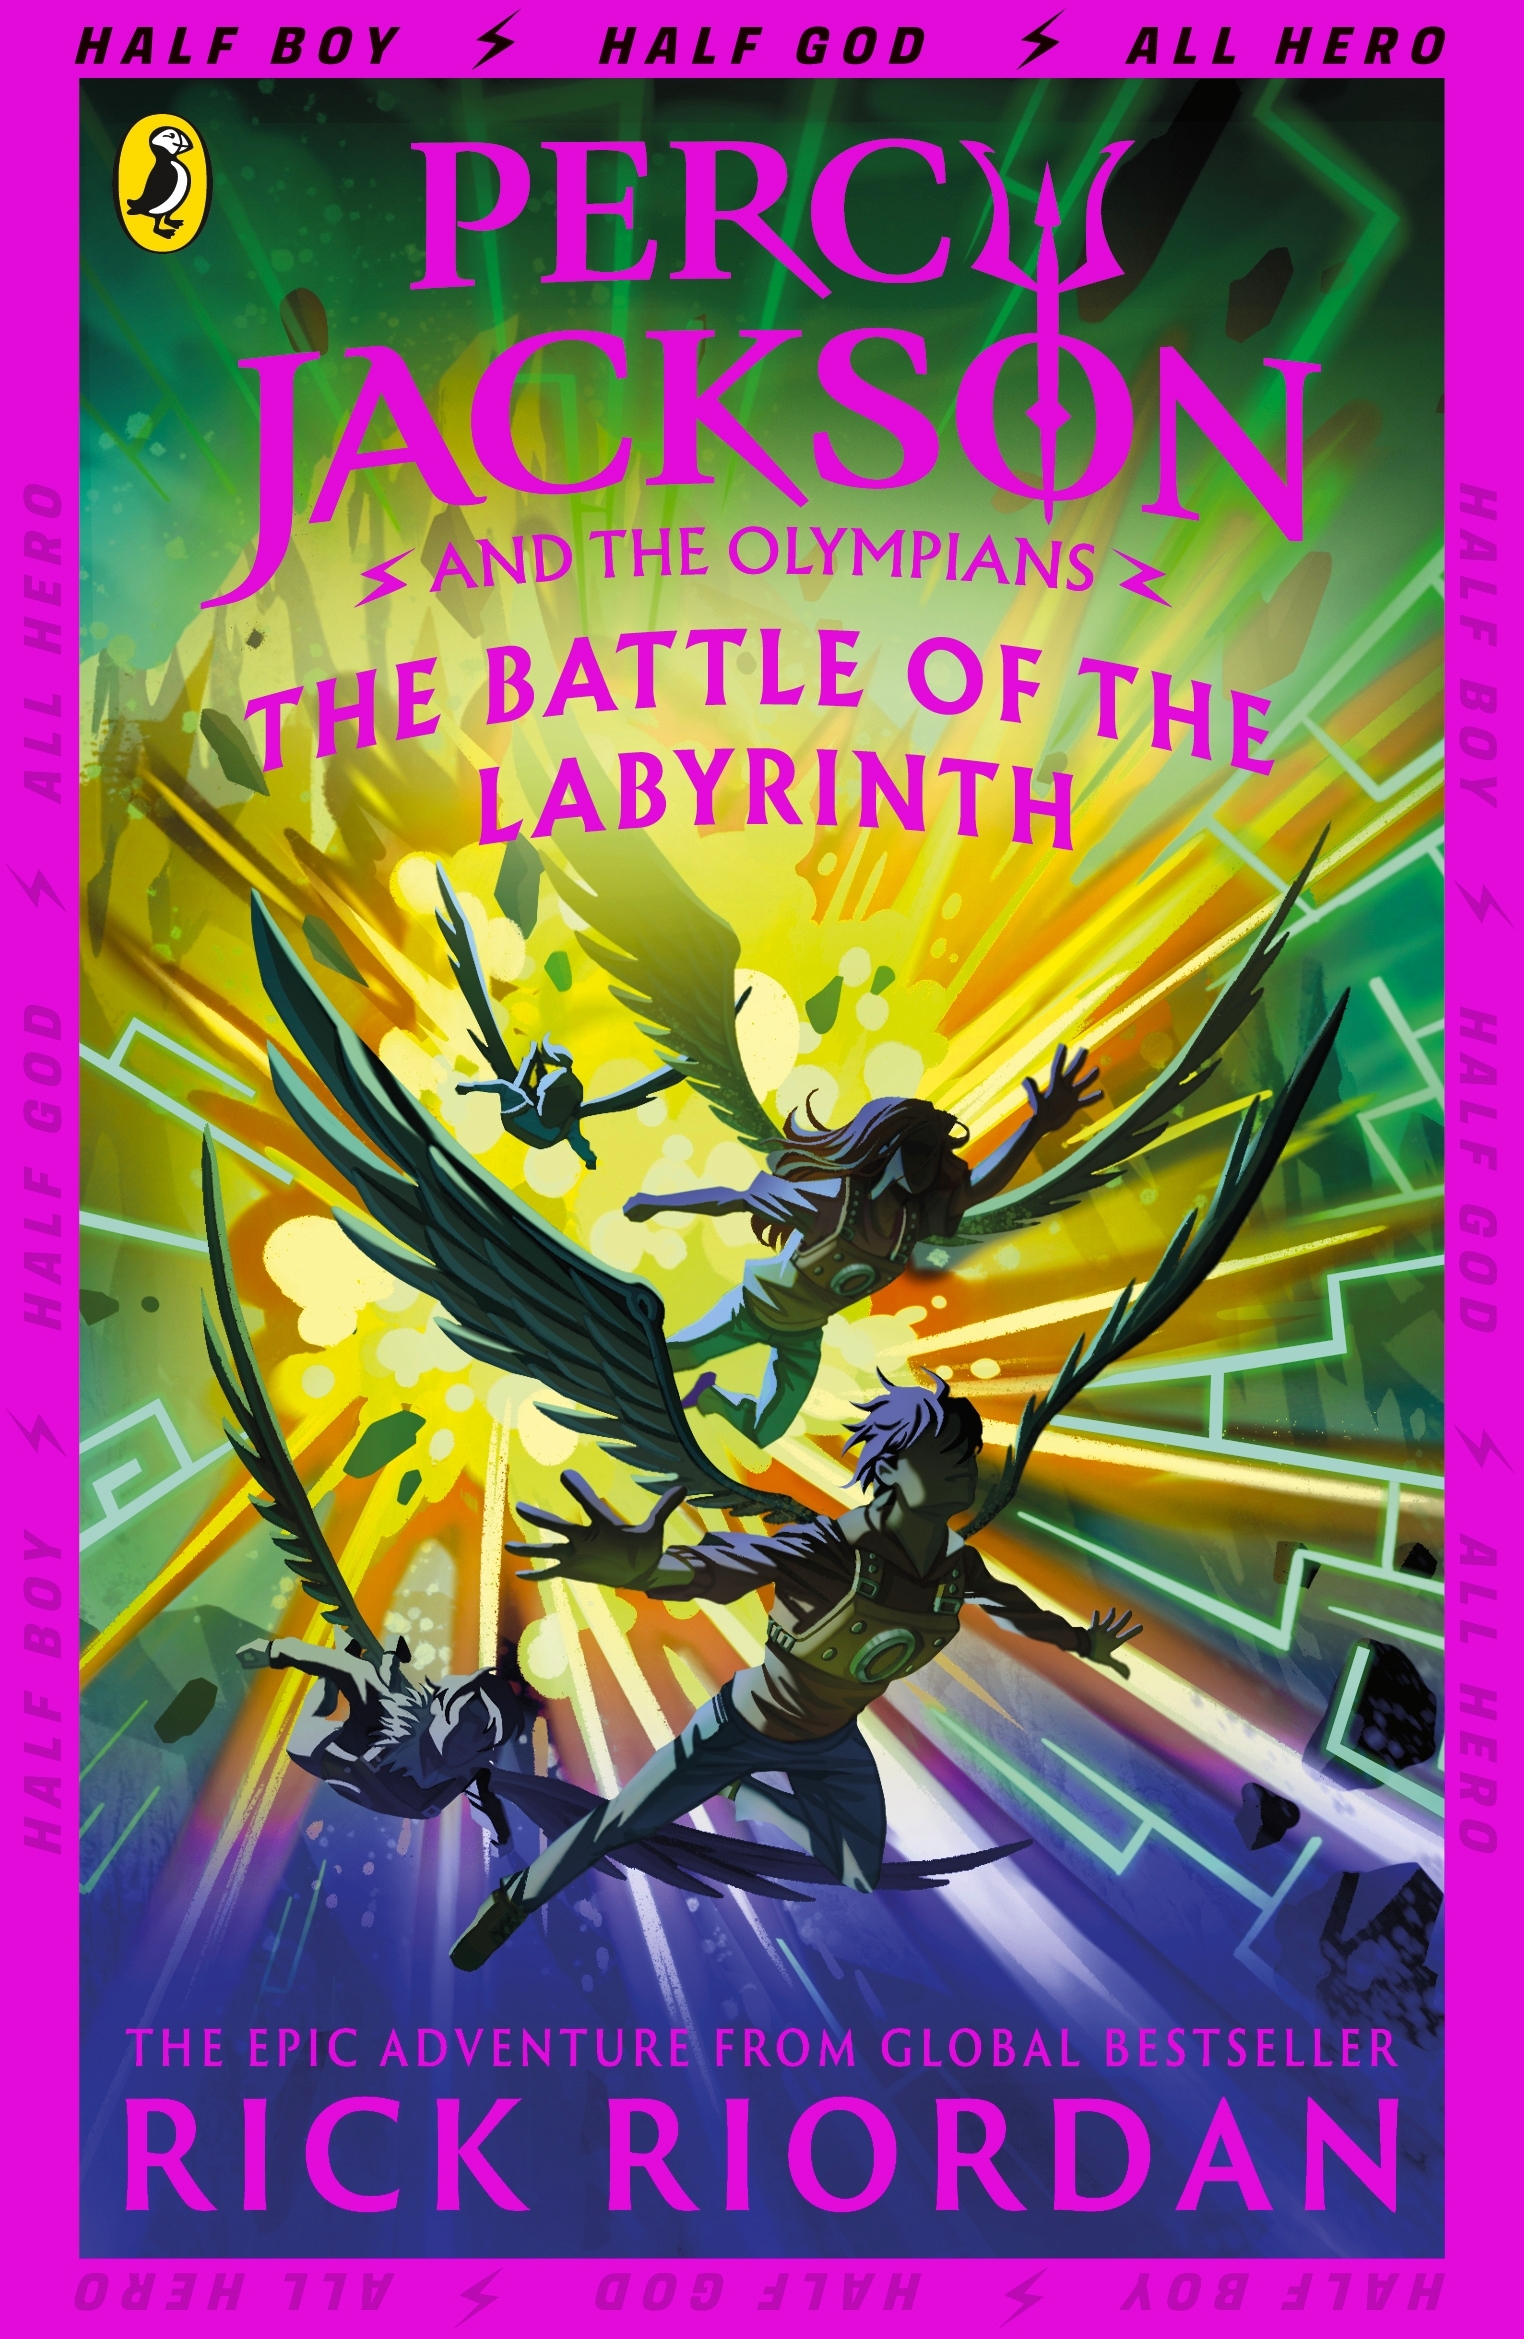 Percy Jackson and the Battle of the Labyrinth (Book 4) by Rick Riordan